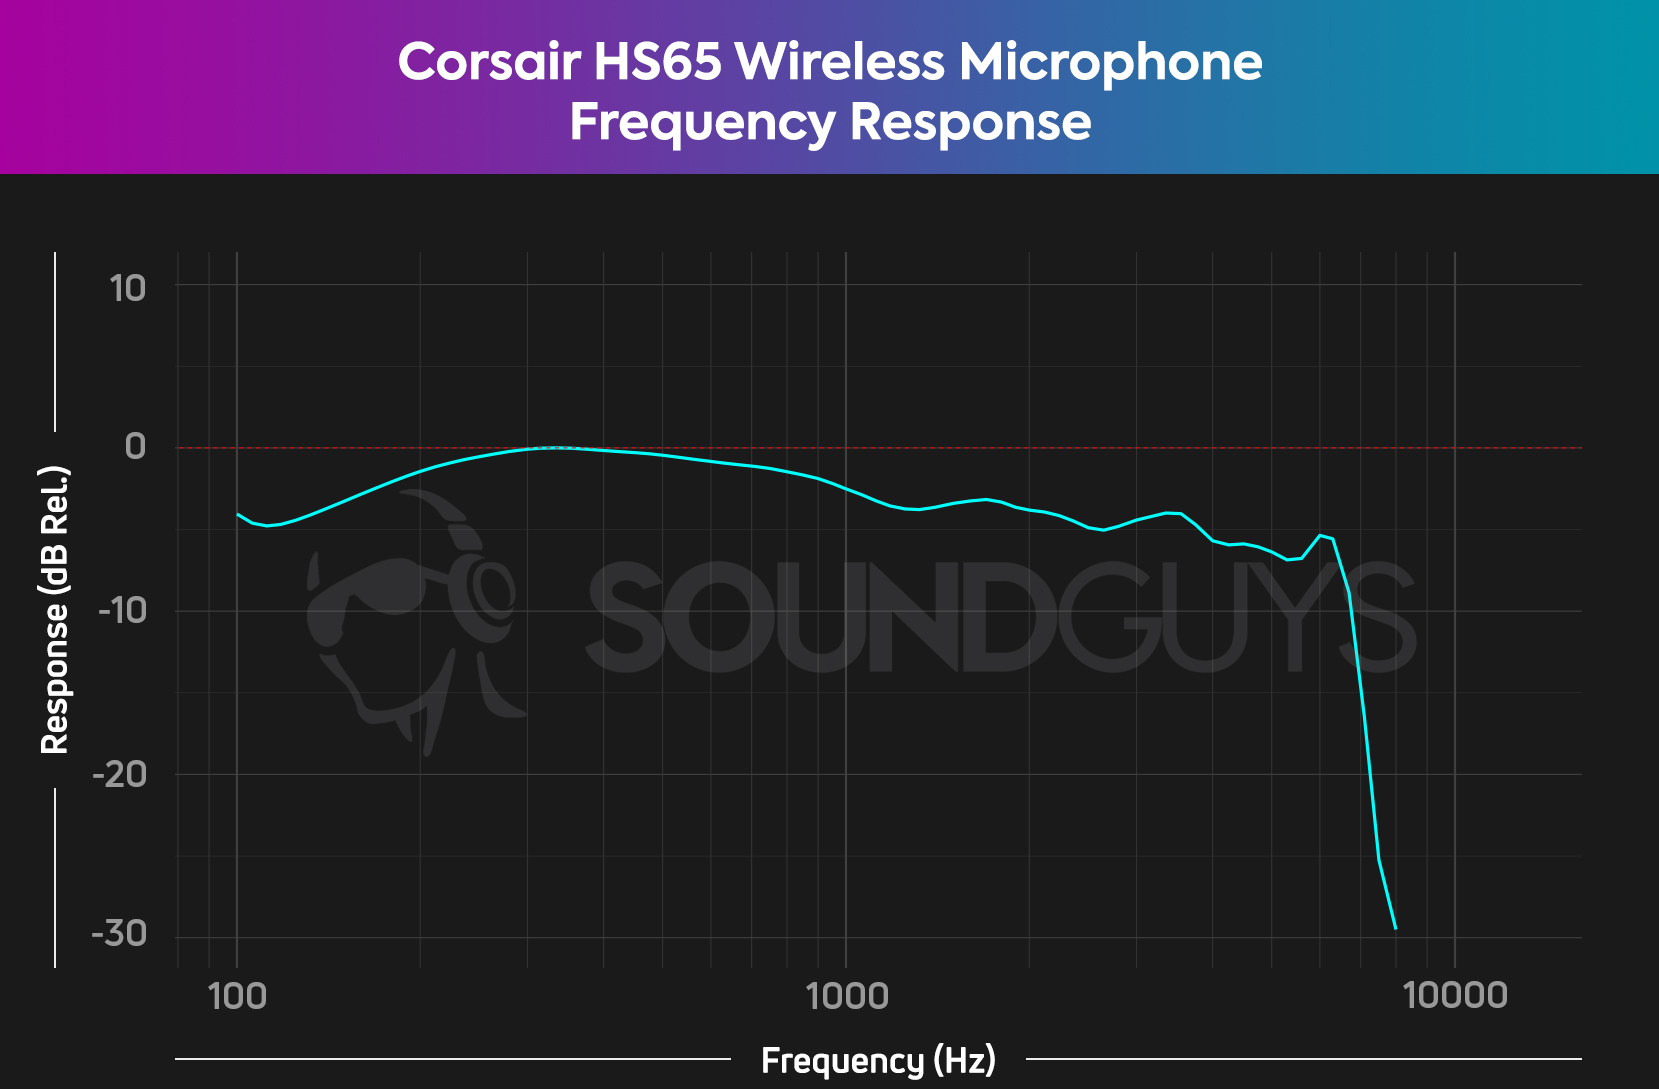 A frequency response chart for the Corsair HS65 Wireless microphone, which looks pretty good on paper.